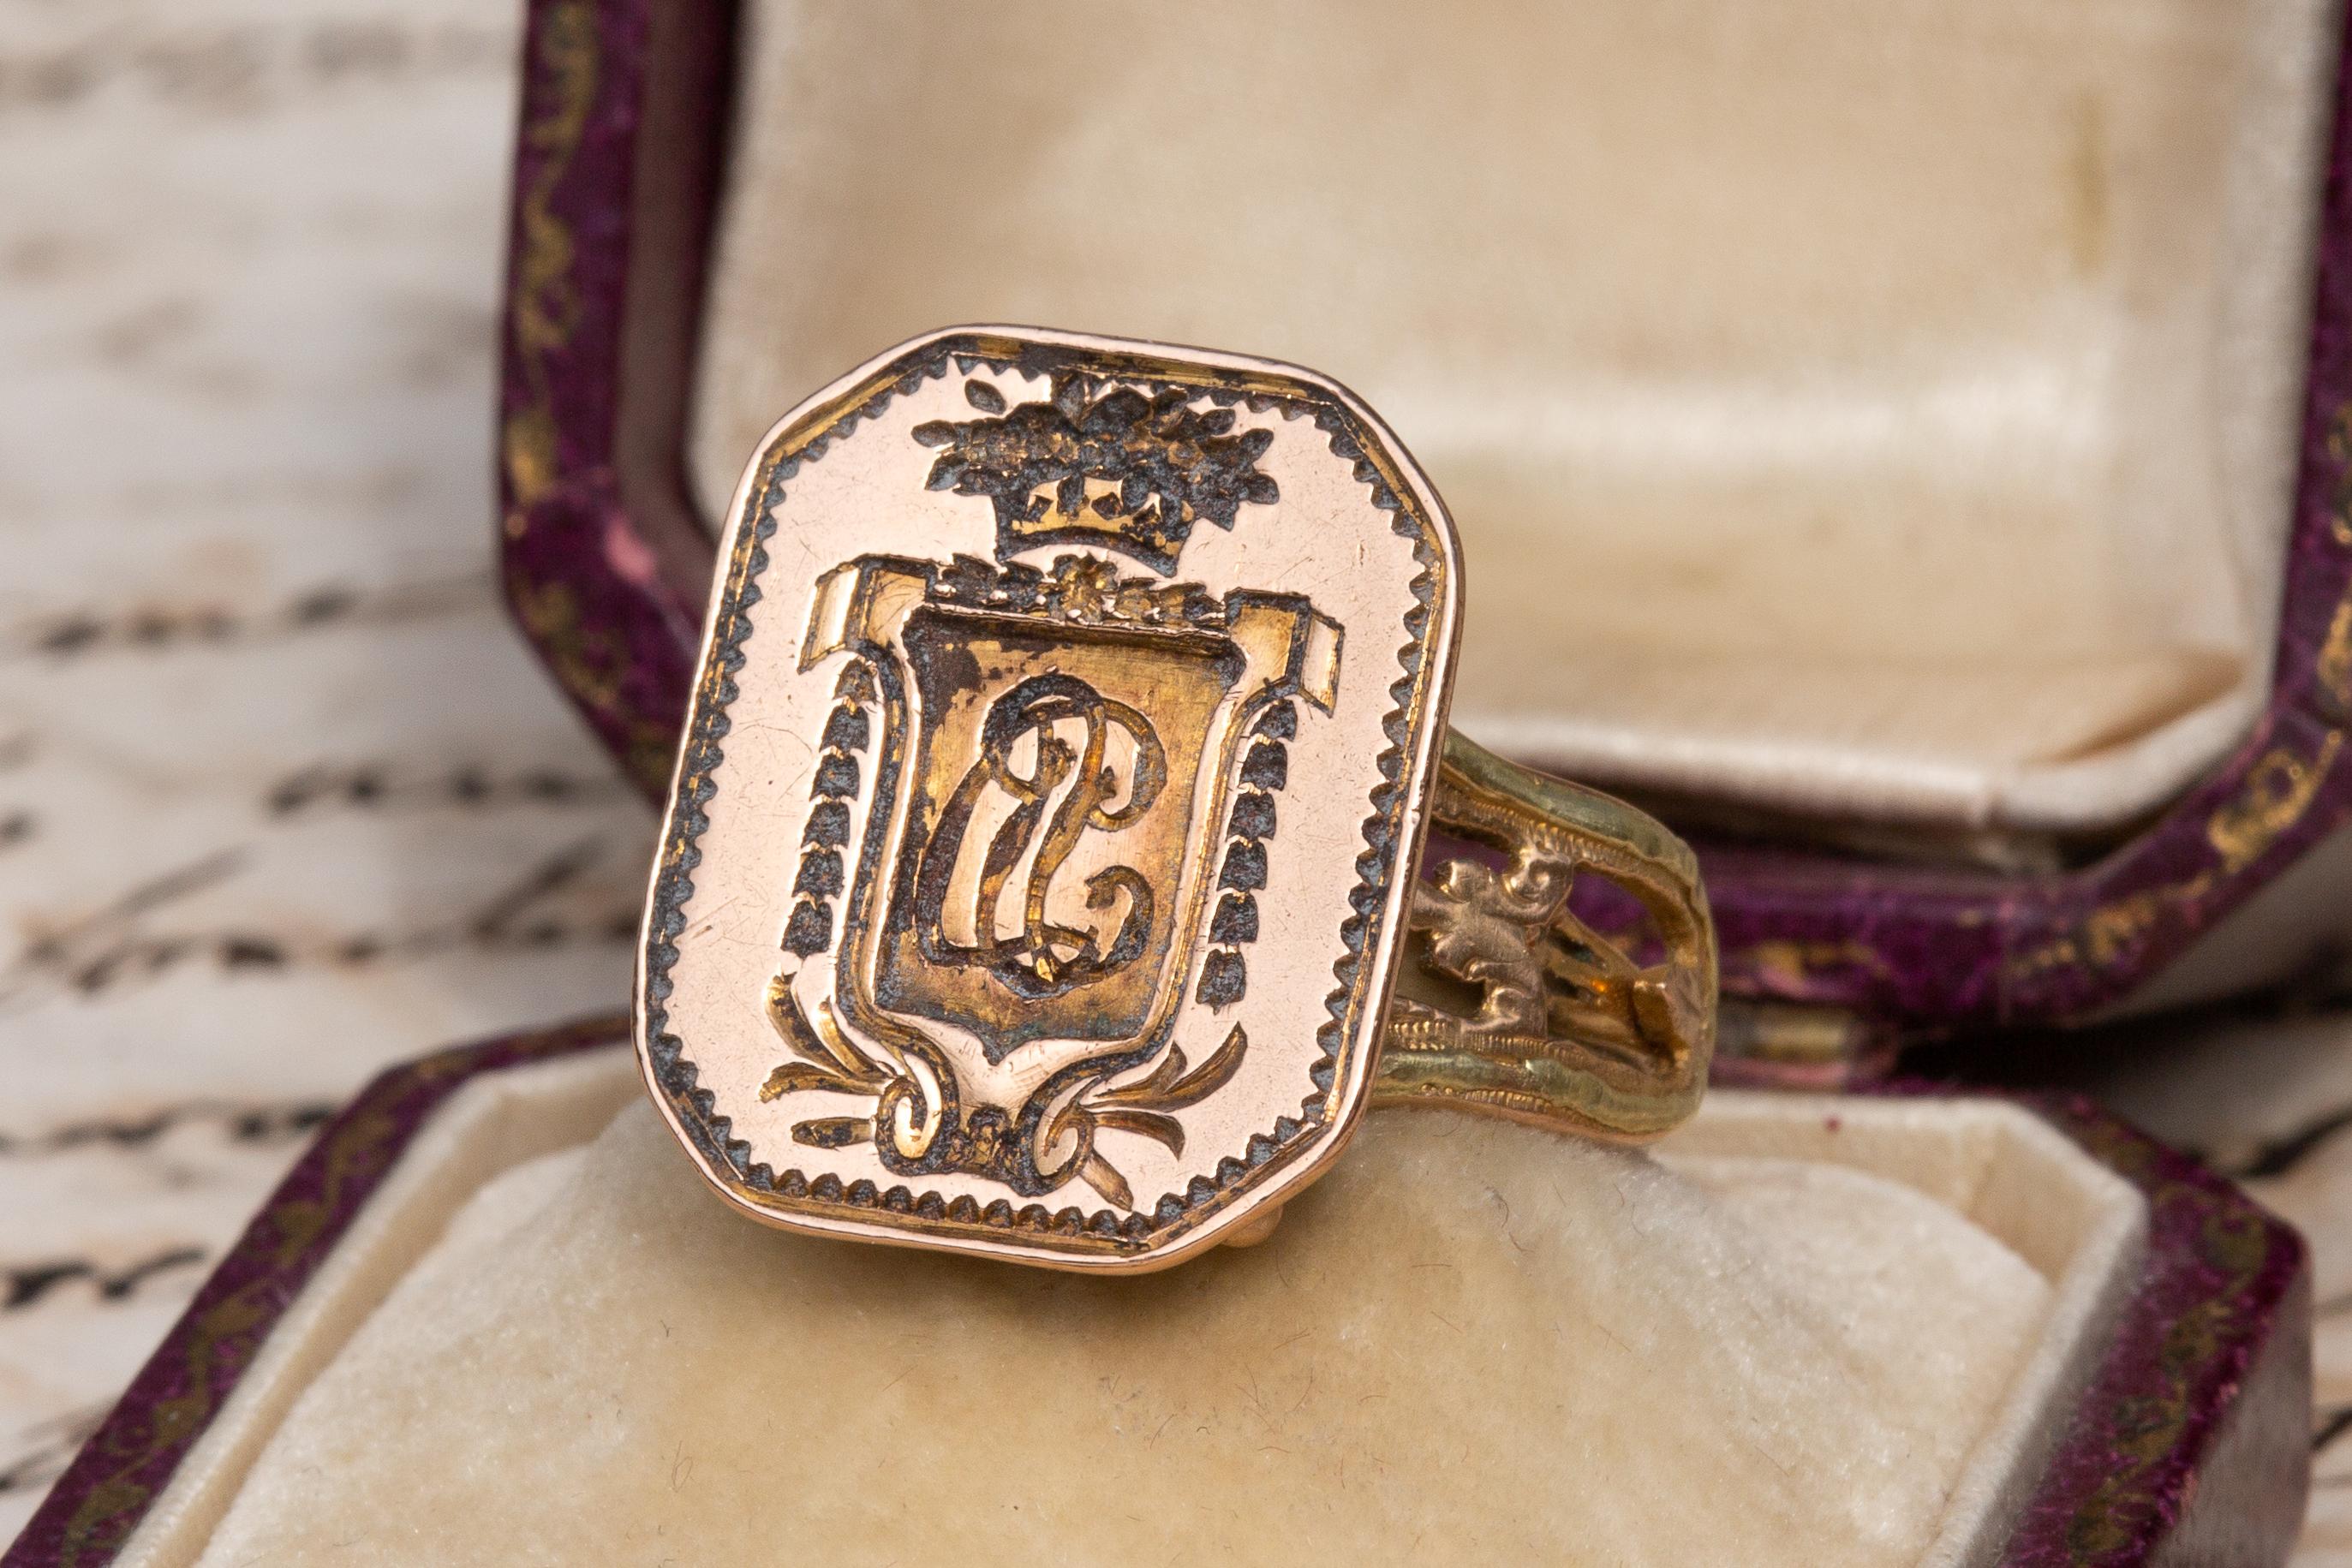 Superb 18th Century French Antique Gold Monogrammed Intaglio Seal Ring 

This antique signet ring was made in France (Paris) during the late 18th century. It started life as a Fob desk seal for to be used for sealing important documents, letters and